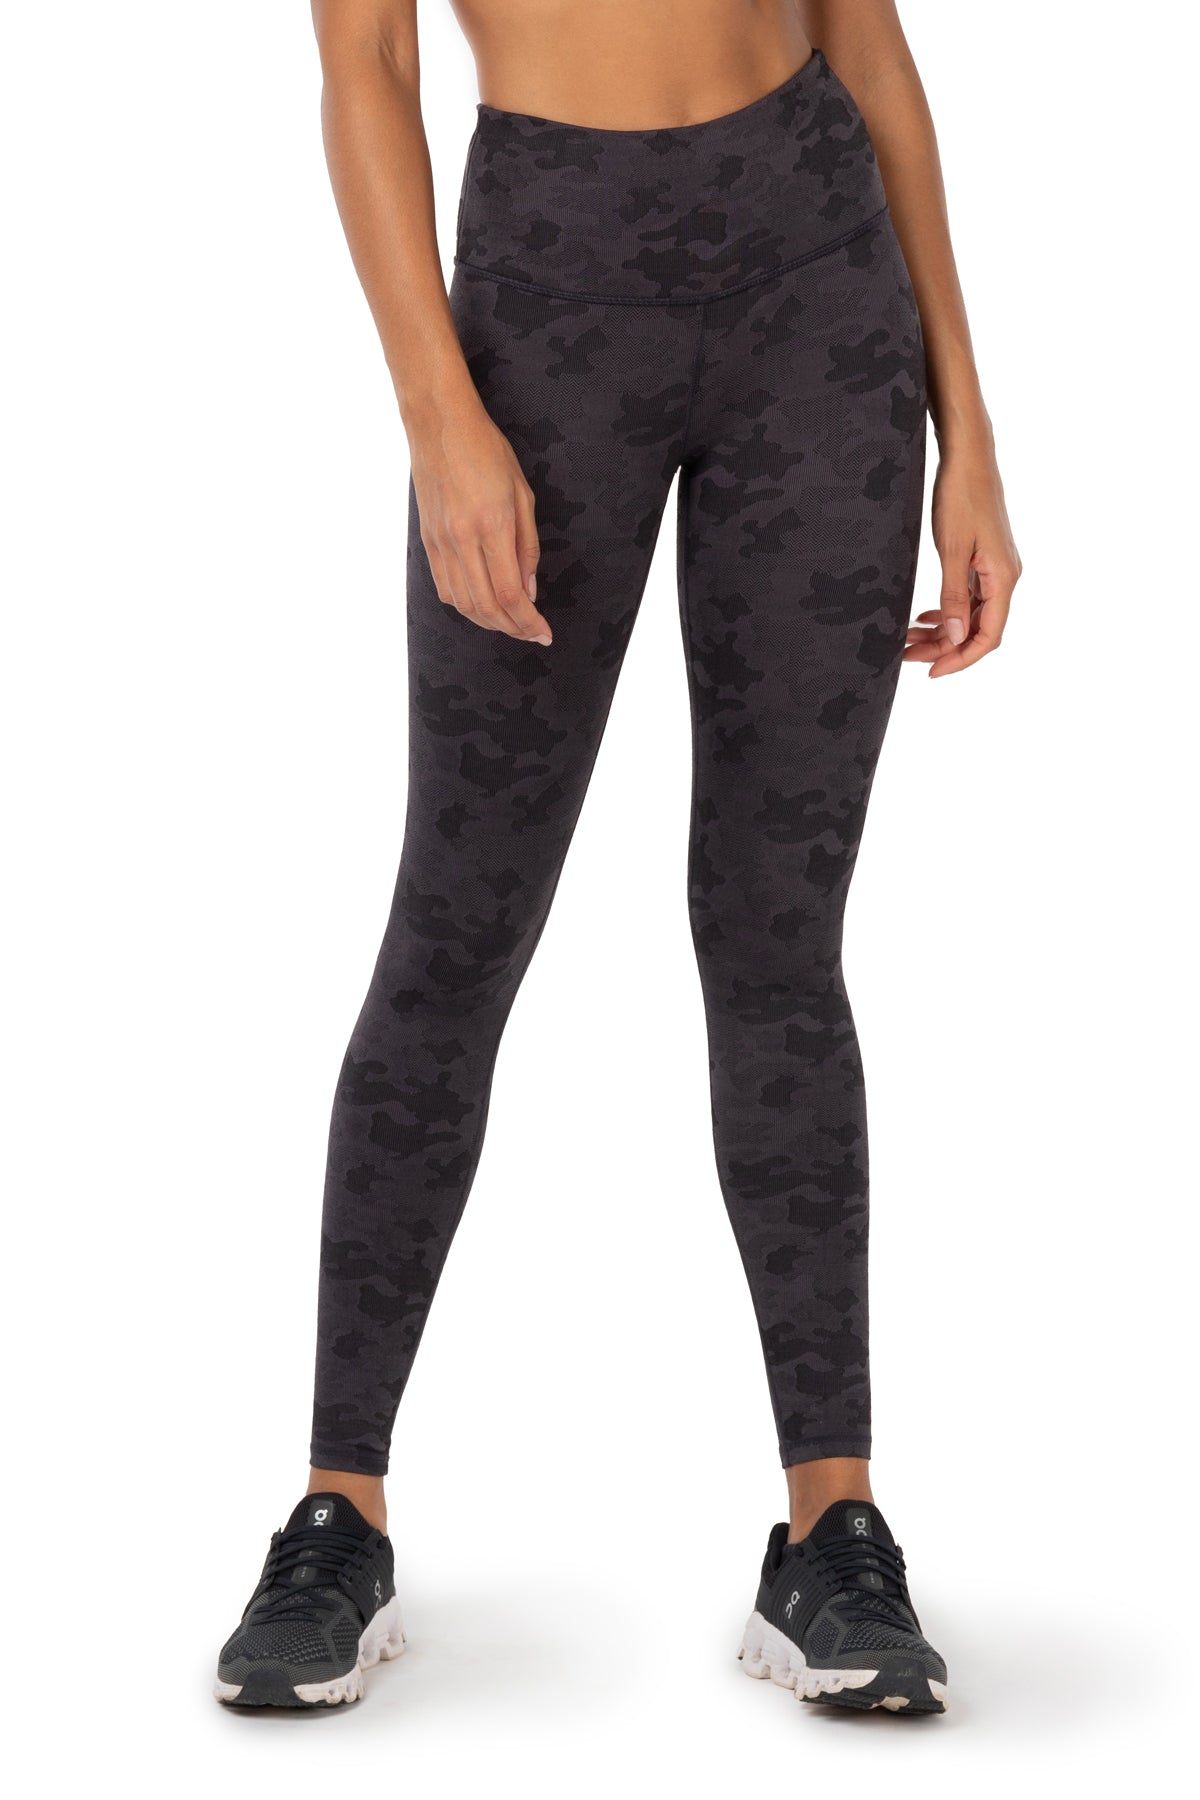 GAYHAY Fleece Lined Leggings with Pockets for Women - High Waisted